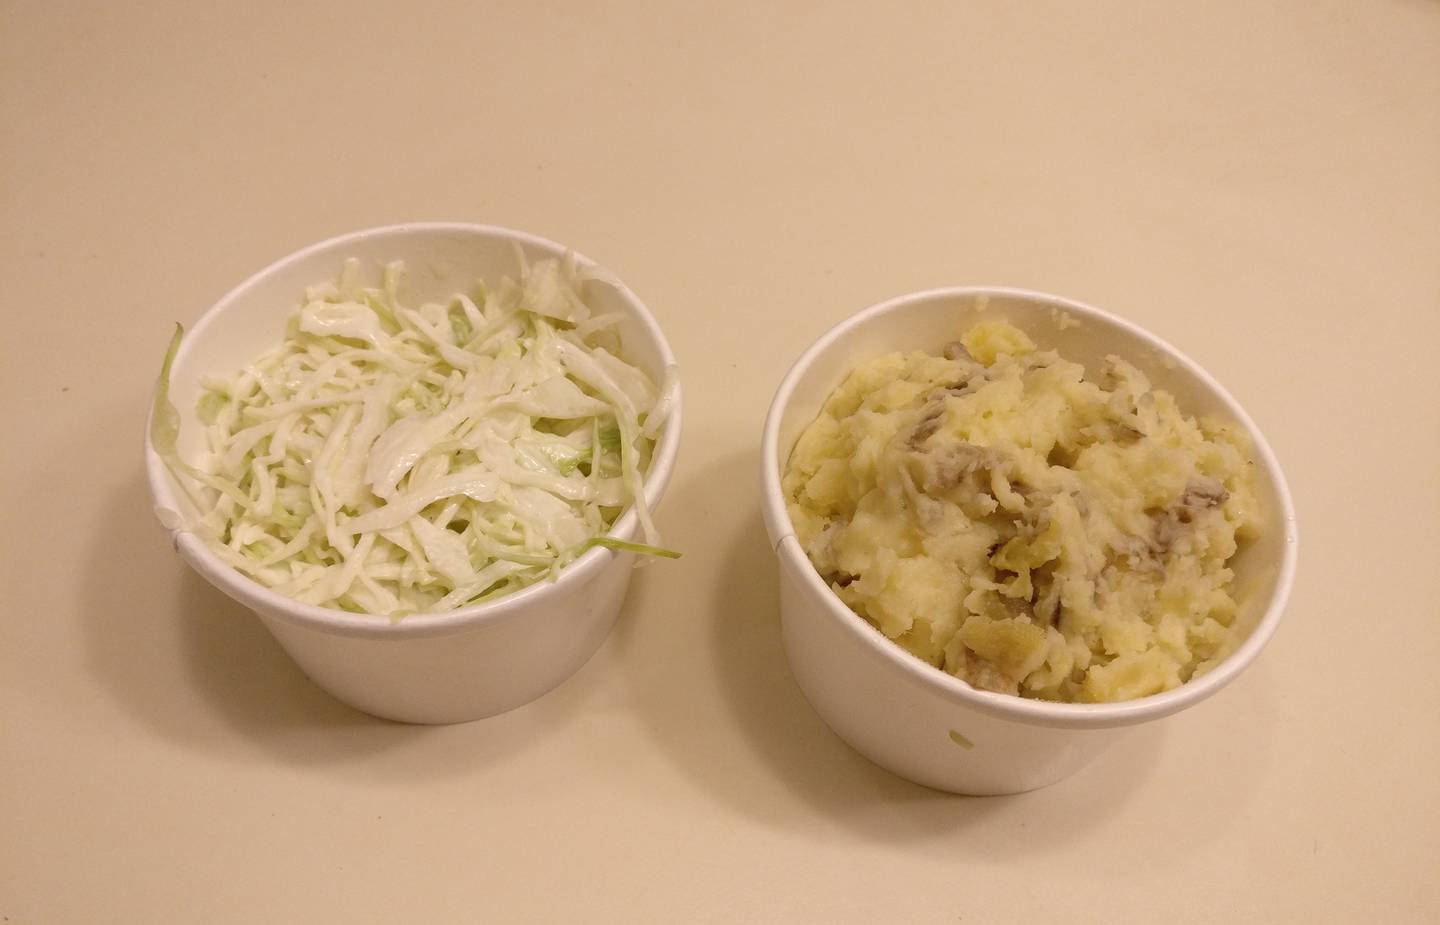 Cole slaw and mashed potatoes from Birdette's at the Dream Hall in Elgin.